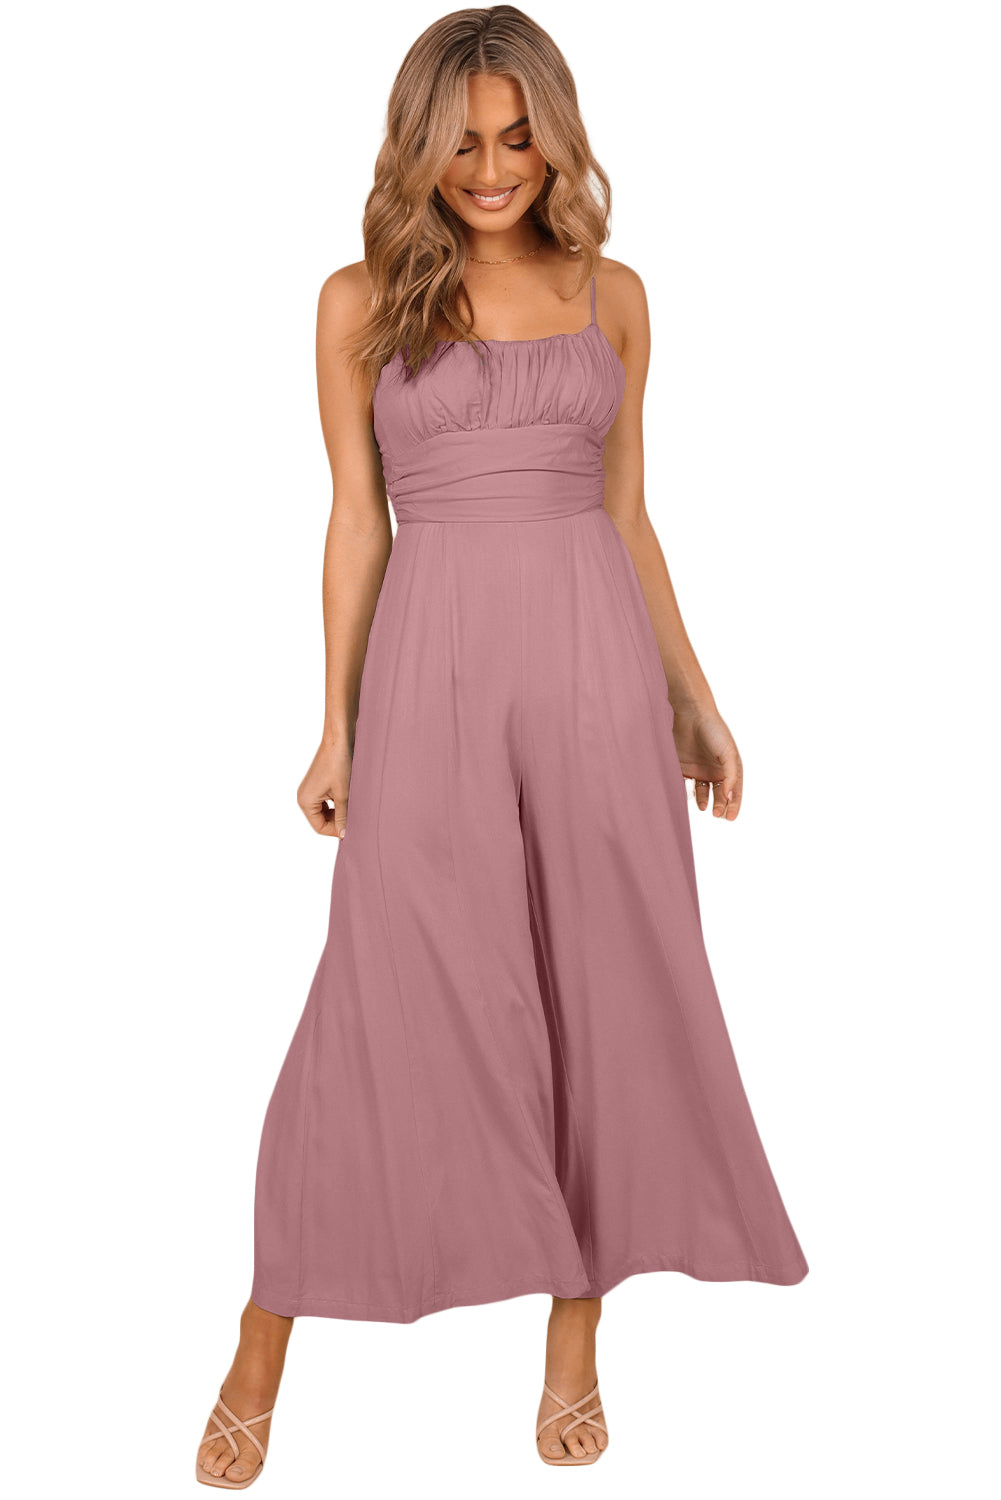 Pink Spaghetti Straps Backless Knot Wide-Leg Jumpsuit